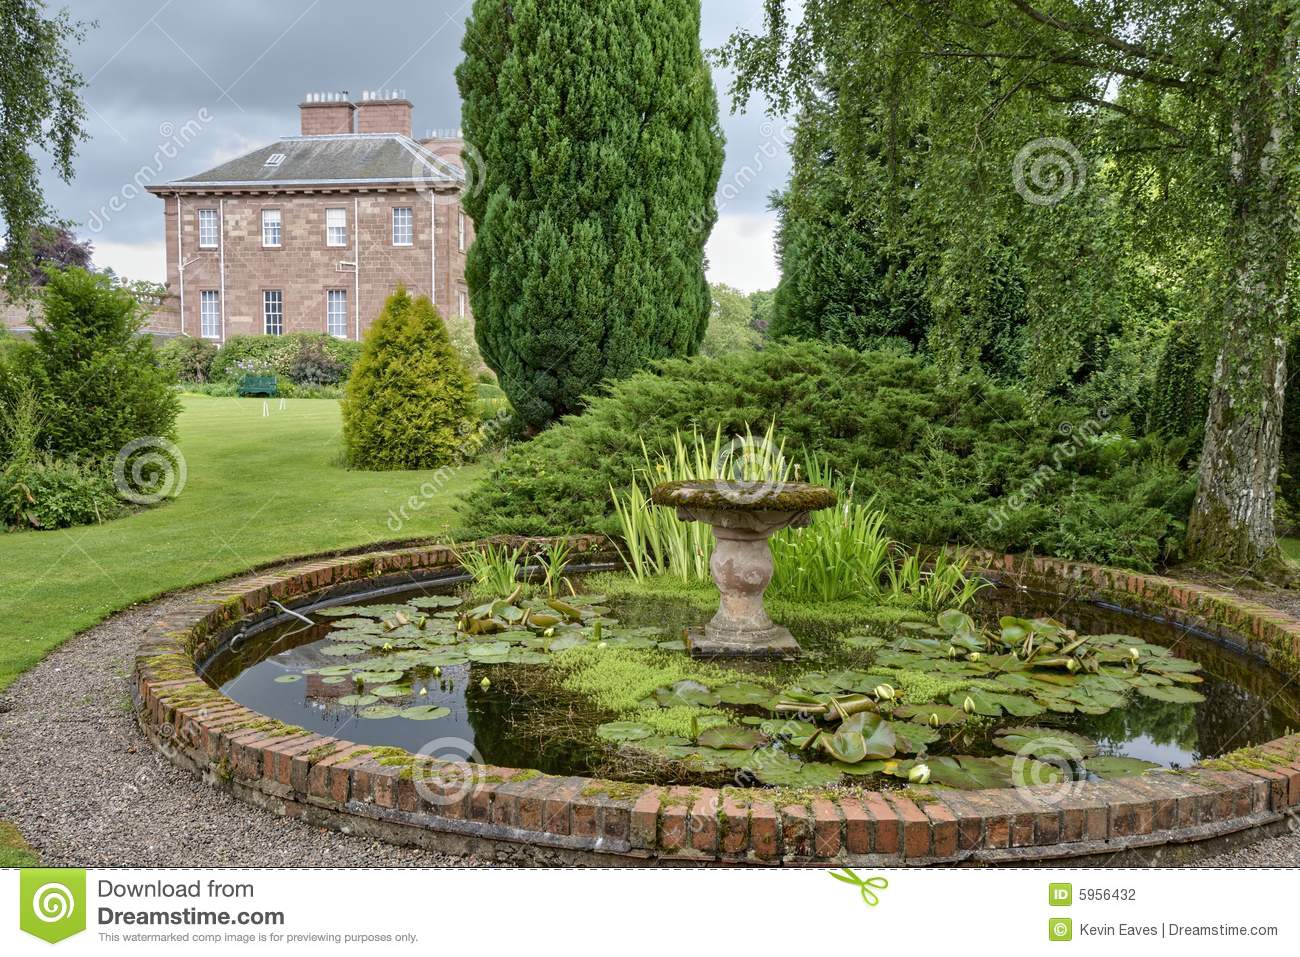 An Ornamental Pond In A Country Estate Garden With A Large House In    